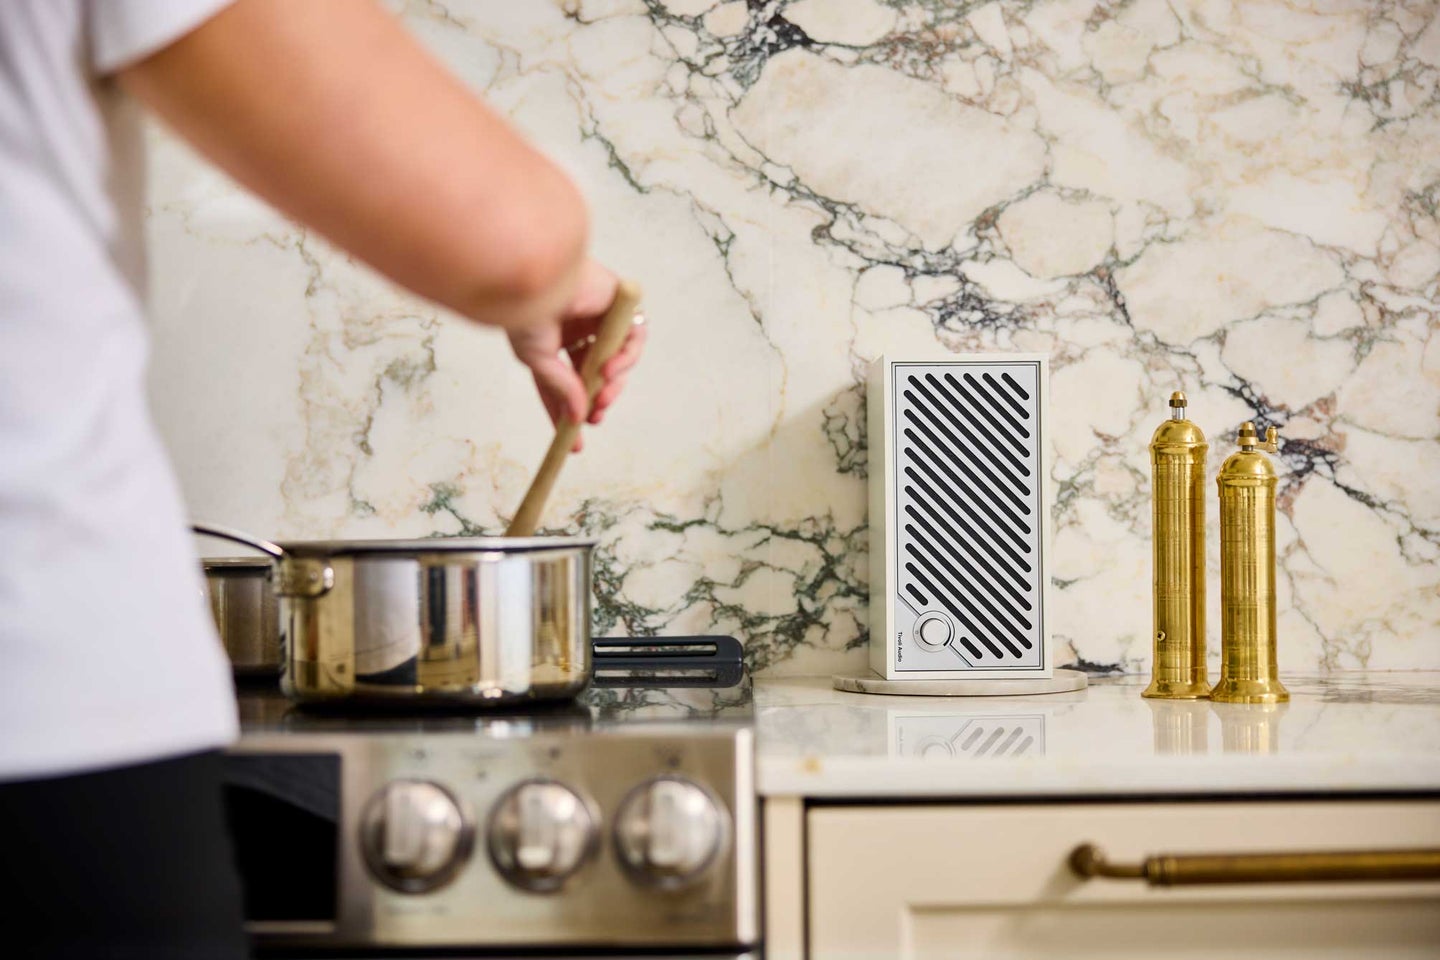 Tivoli Audio new white Model Two Digital streaming speaker in a kitchen with a woman cooking